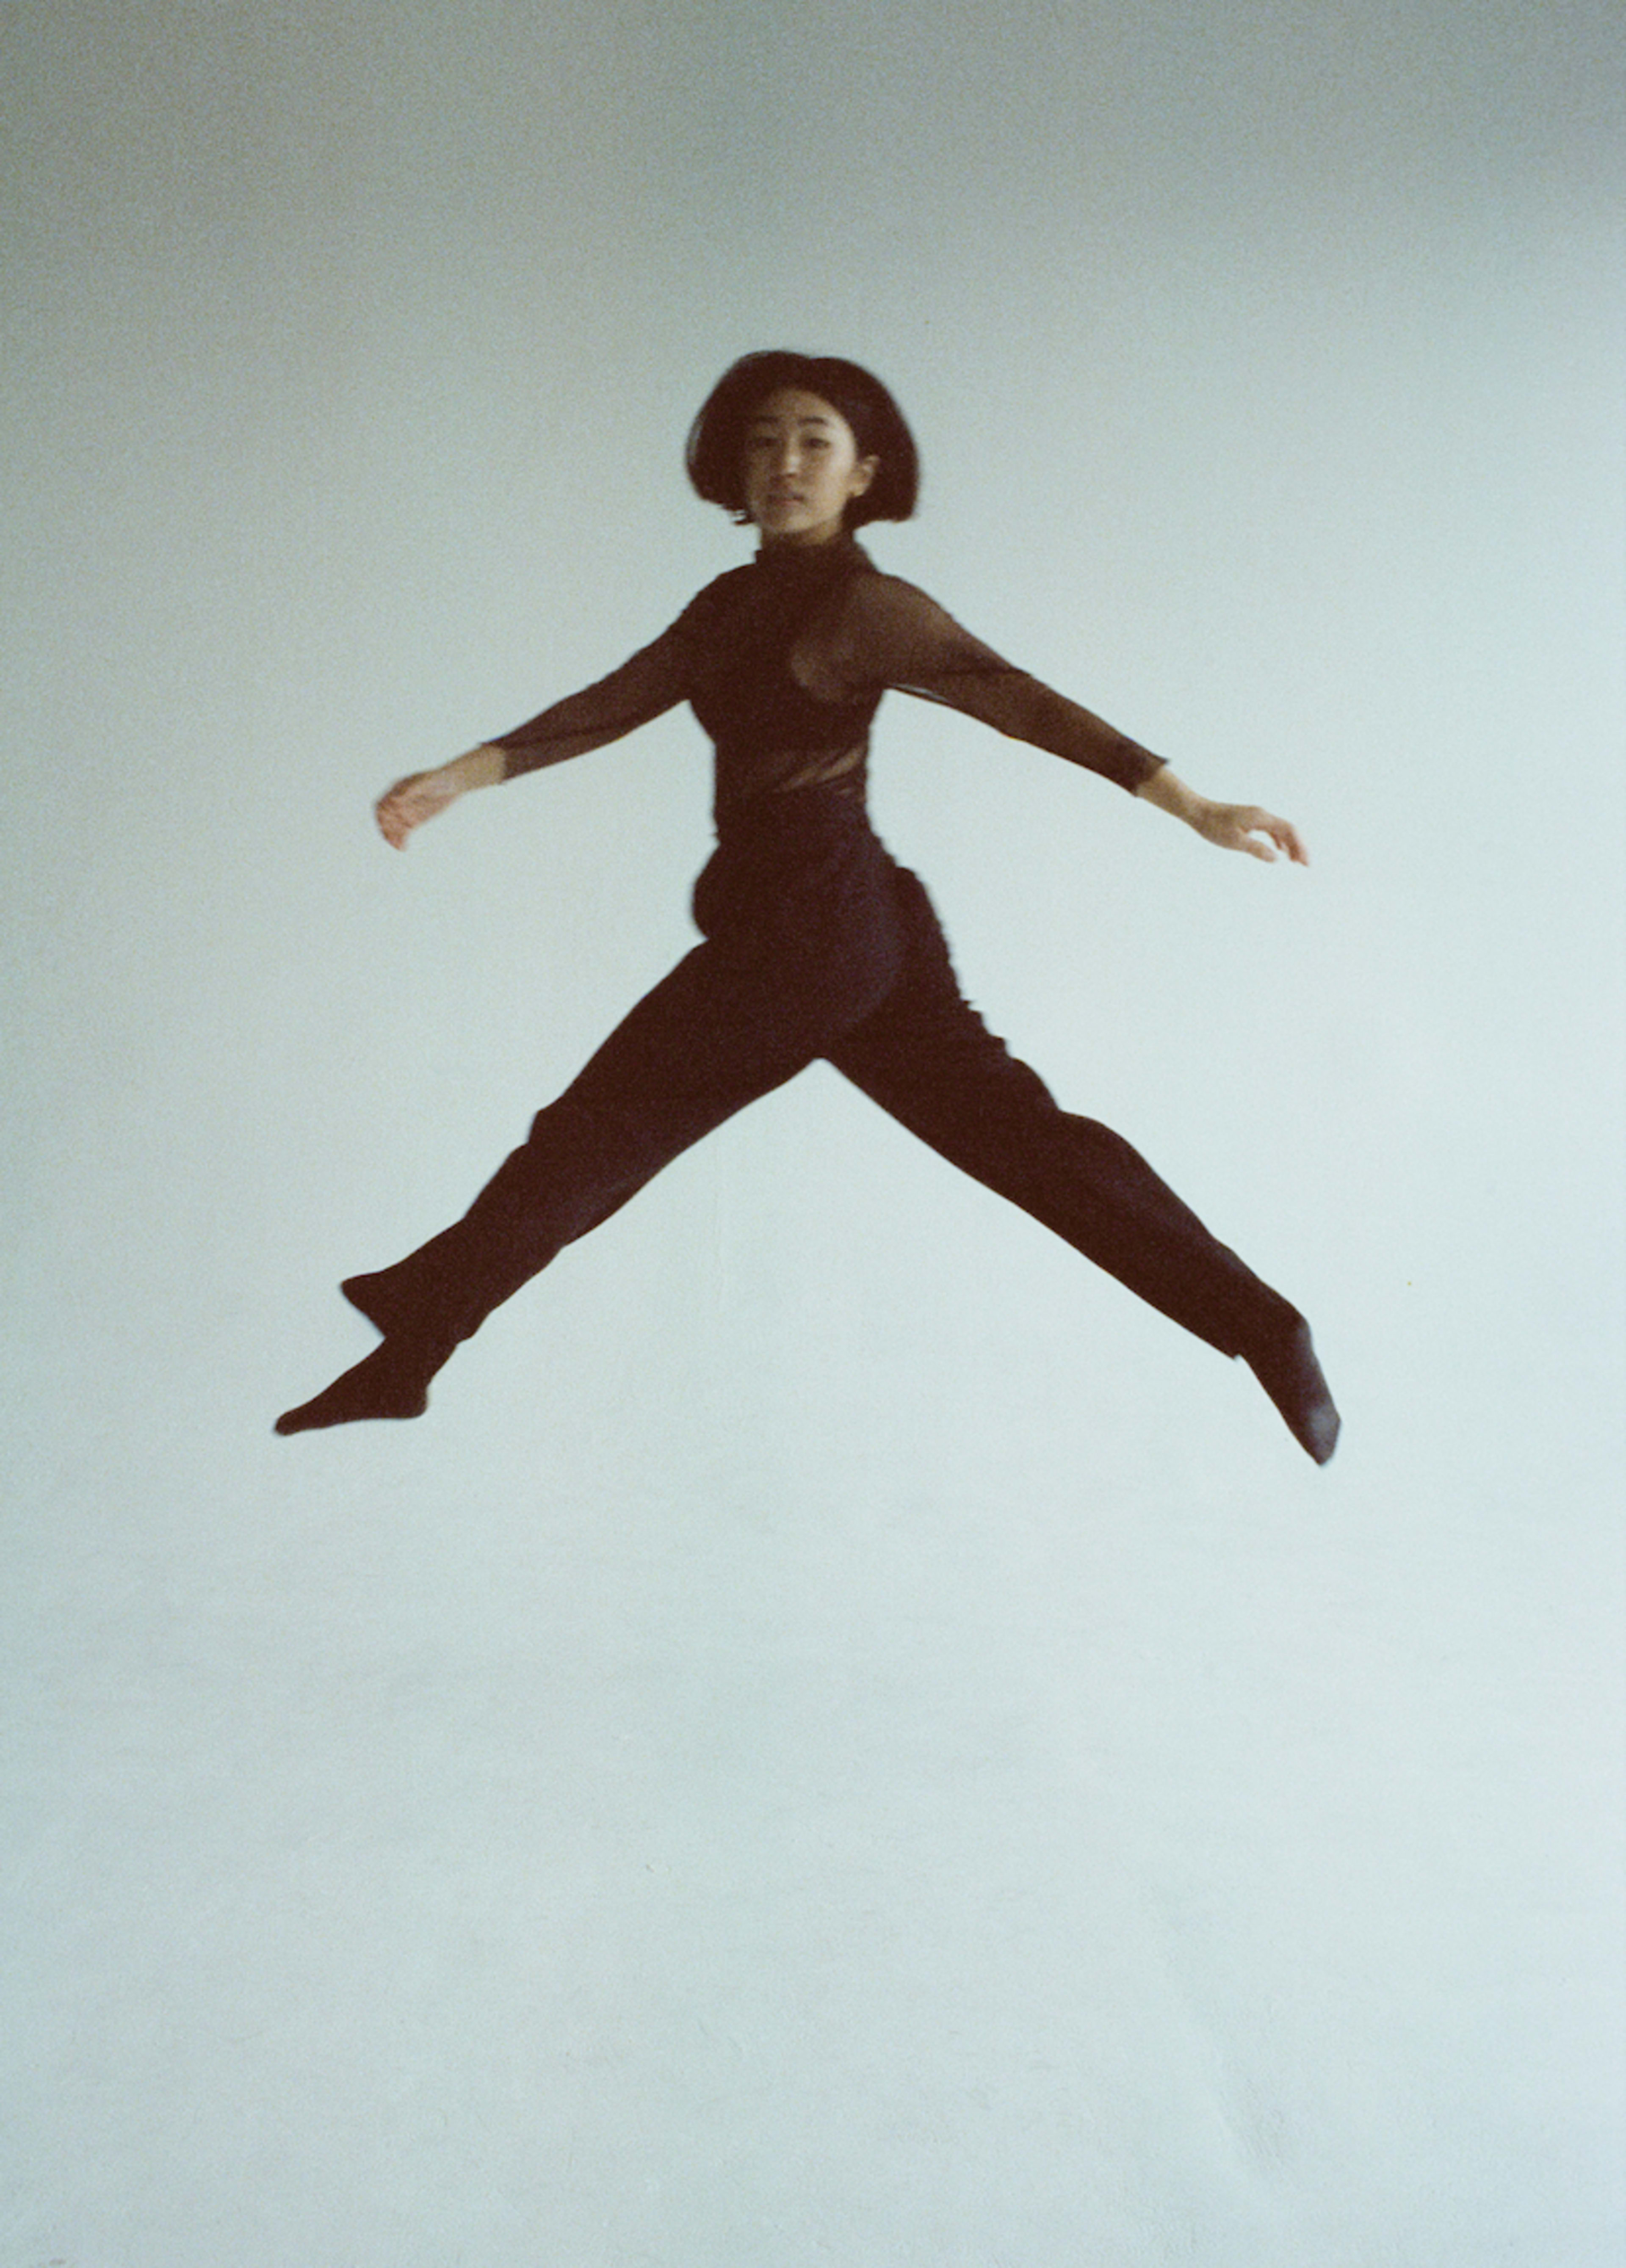 A woman in a black outfit is jumping during a photoshoot.